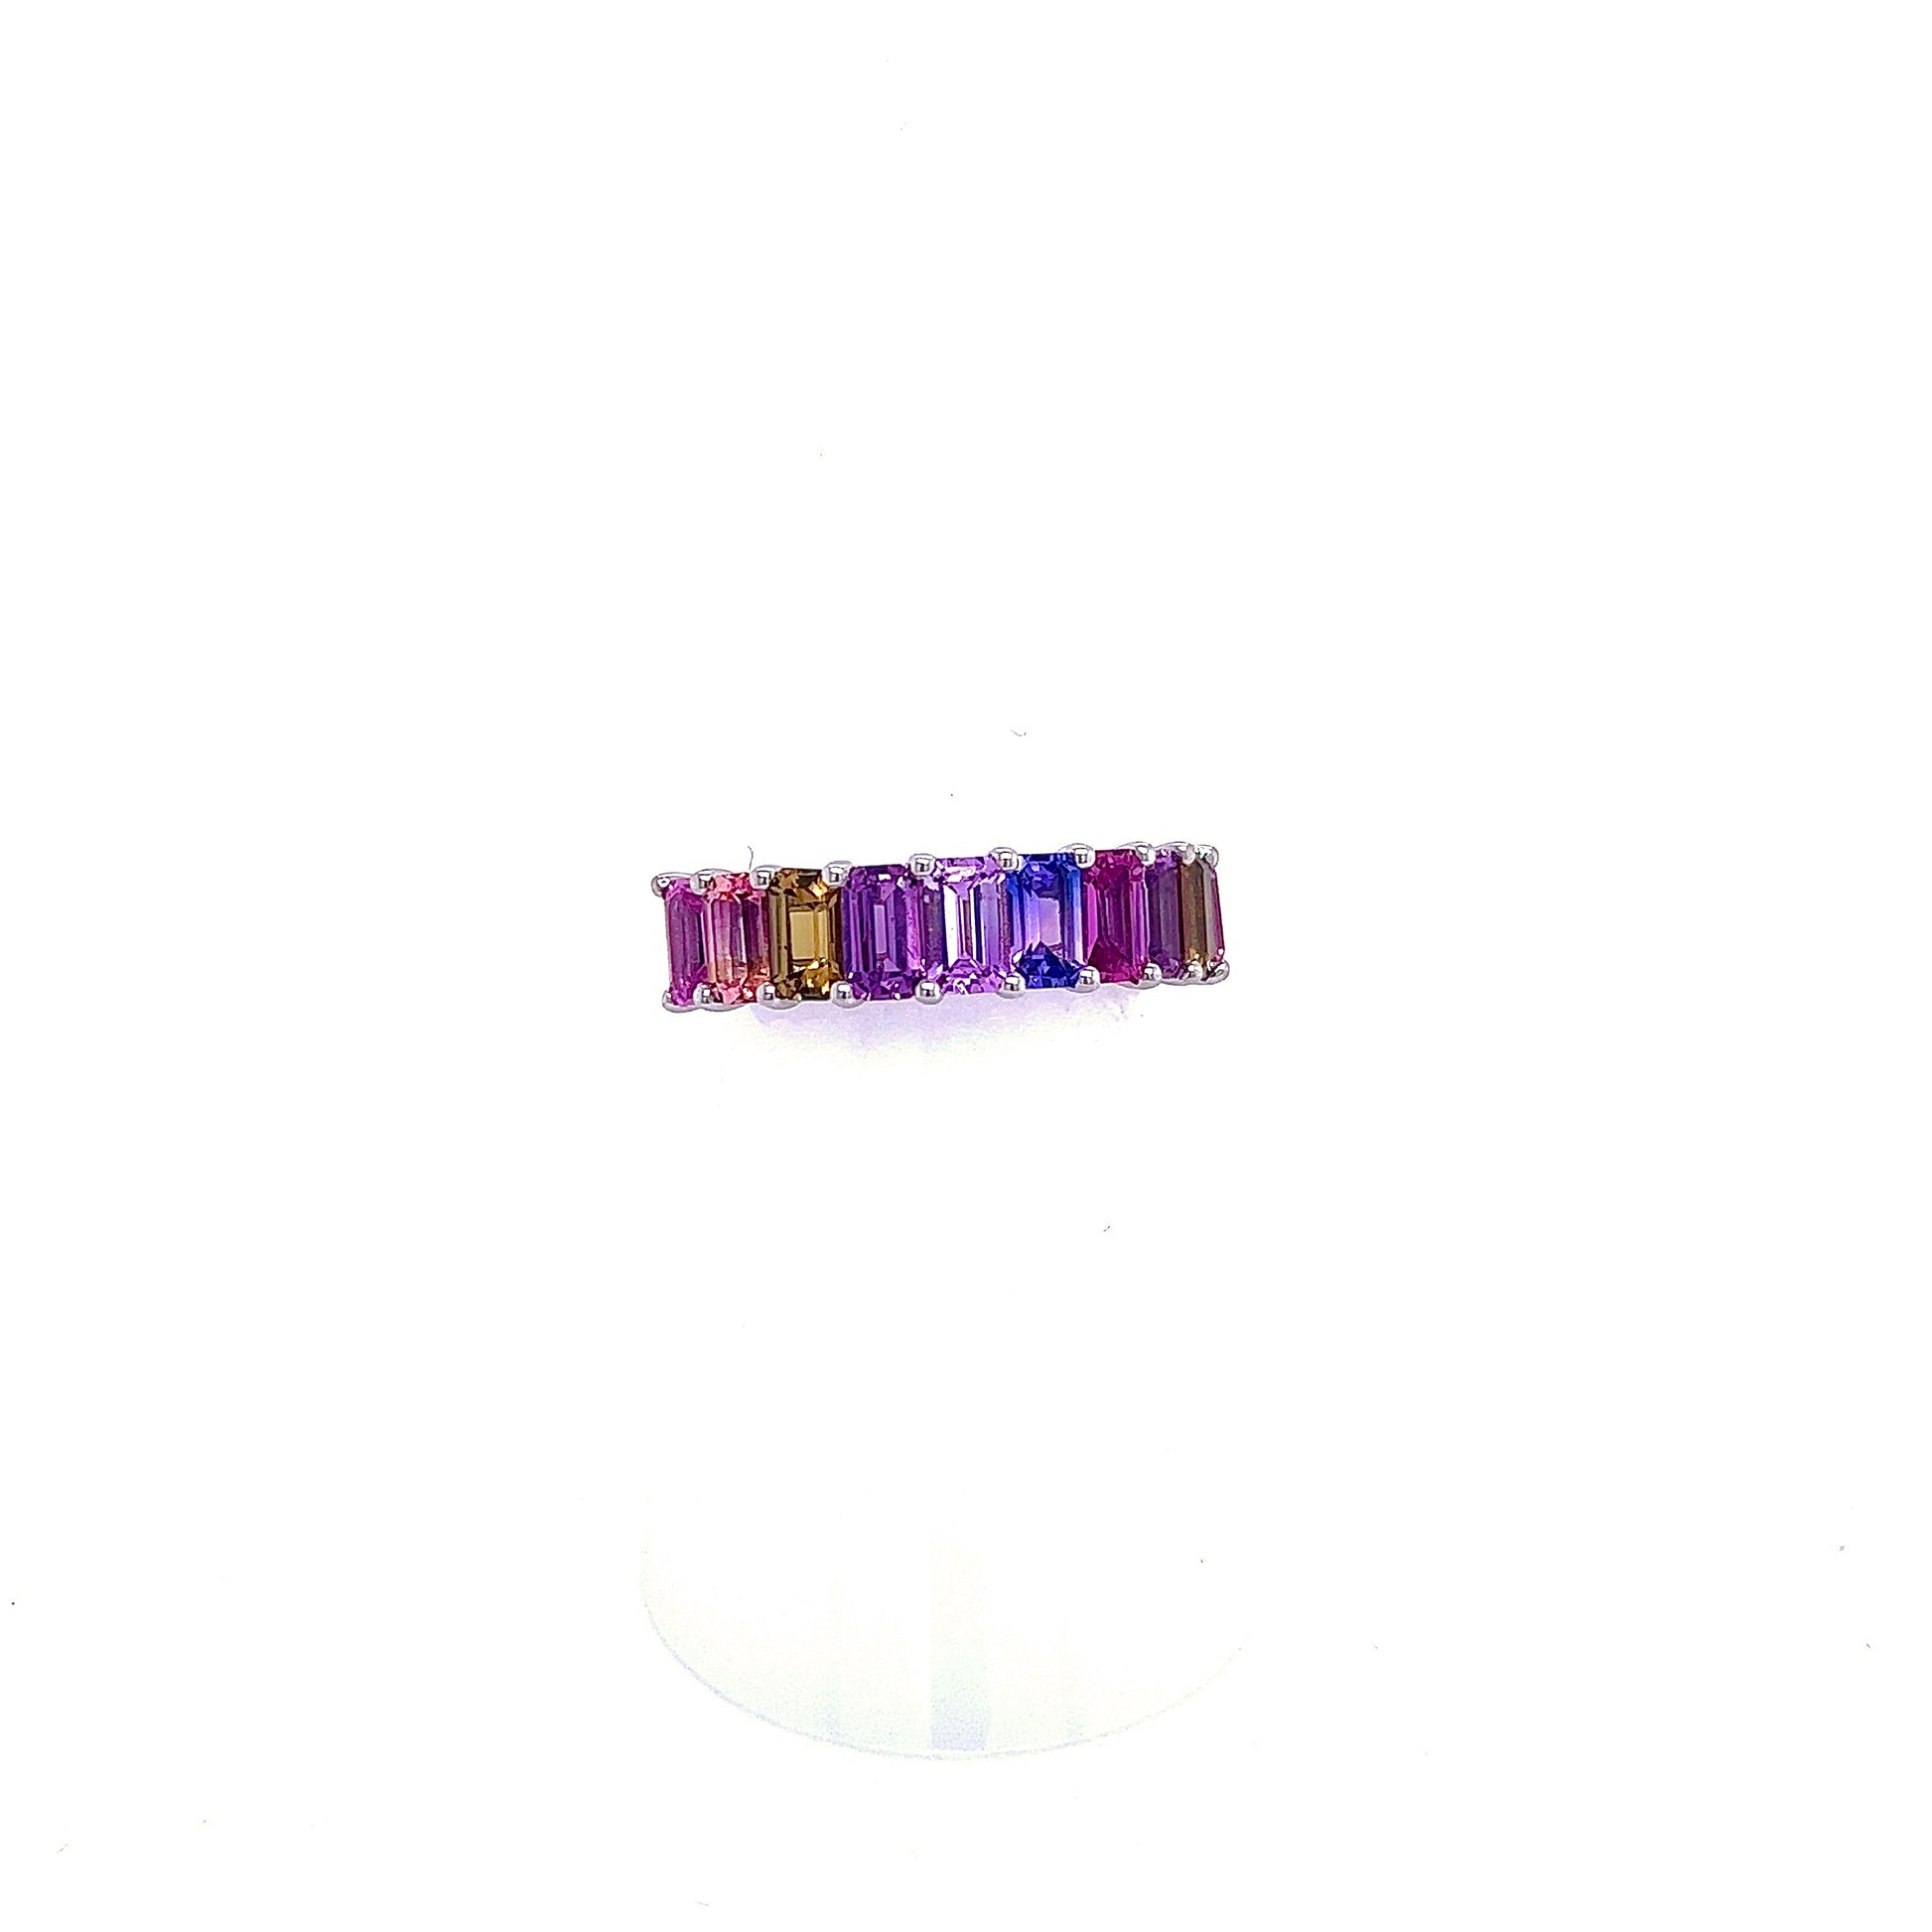 Natural Multicolored Sapphire Ring Size 6.5 14k W Gold 5.28 TCW Certified $3,950 217061 - Certified Fine Jewelry